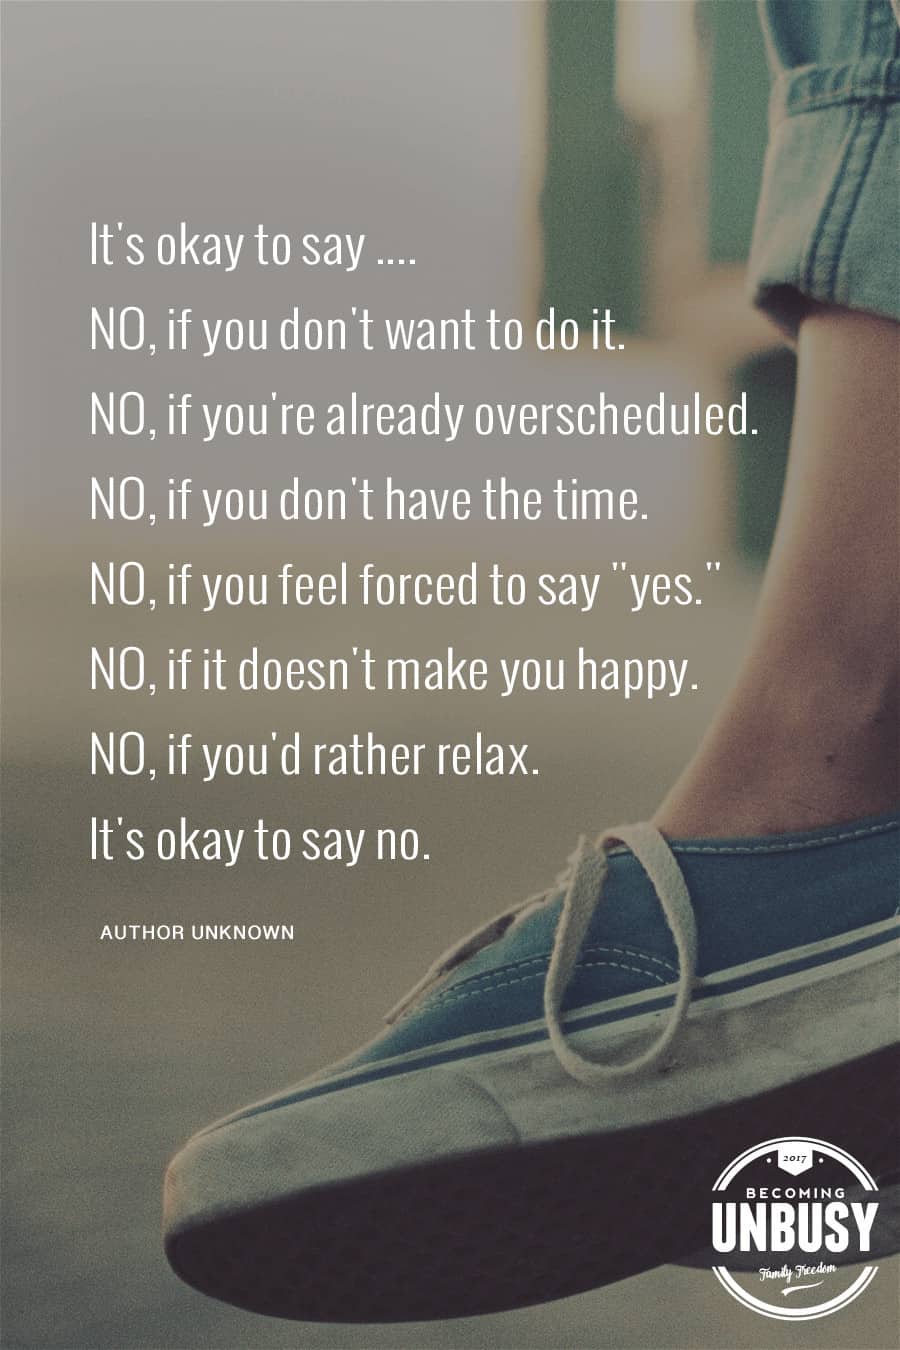 It's okay to say .... NO, if you don't want to do it. NO, if you're already overscheduled. NO, if you don't have the time. NO, if you feel forced to say "yes." NO, if it doesn't make you happy. NO, if you'd rather relax. It's okay to say no. #quote #motherhood *Love this post and this free "saying no" printable